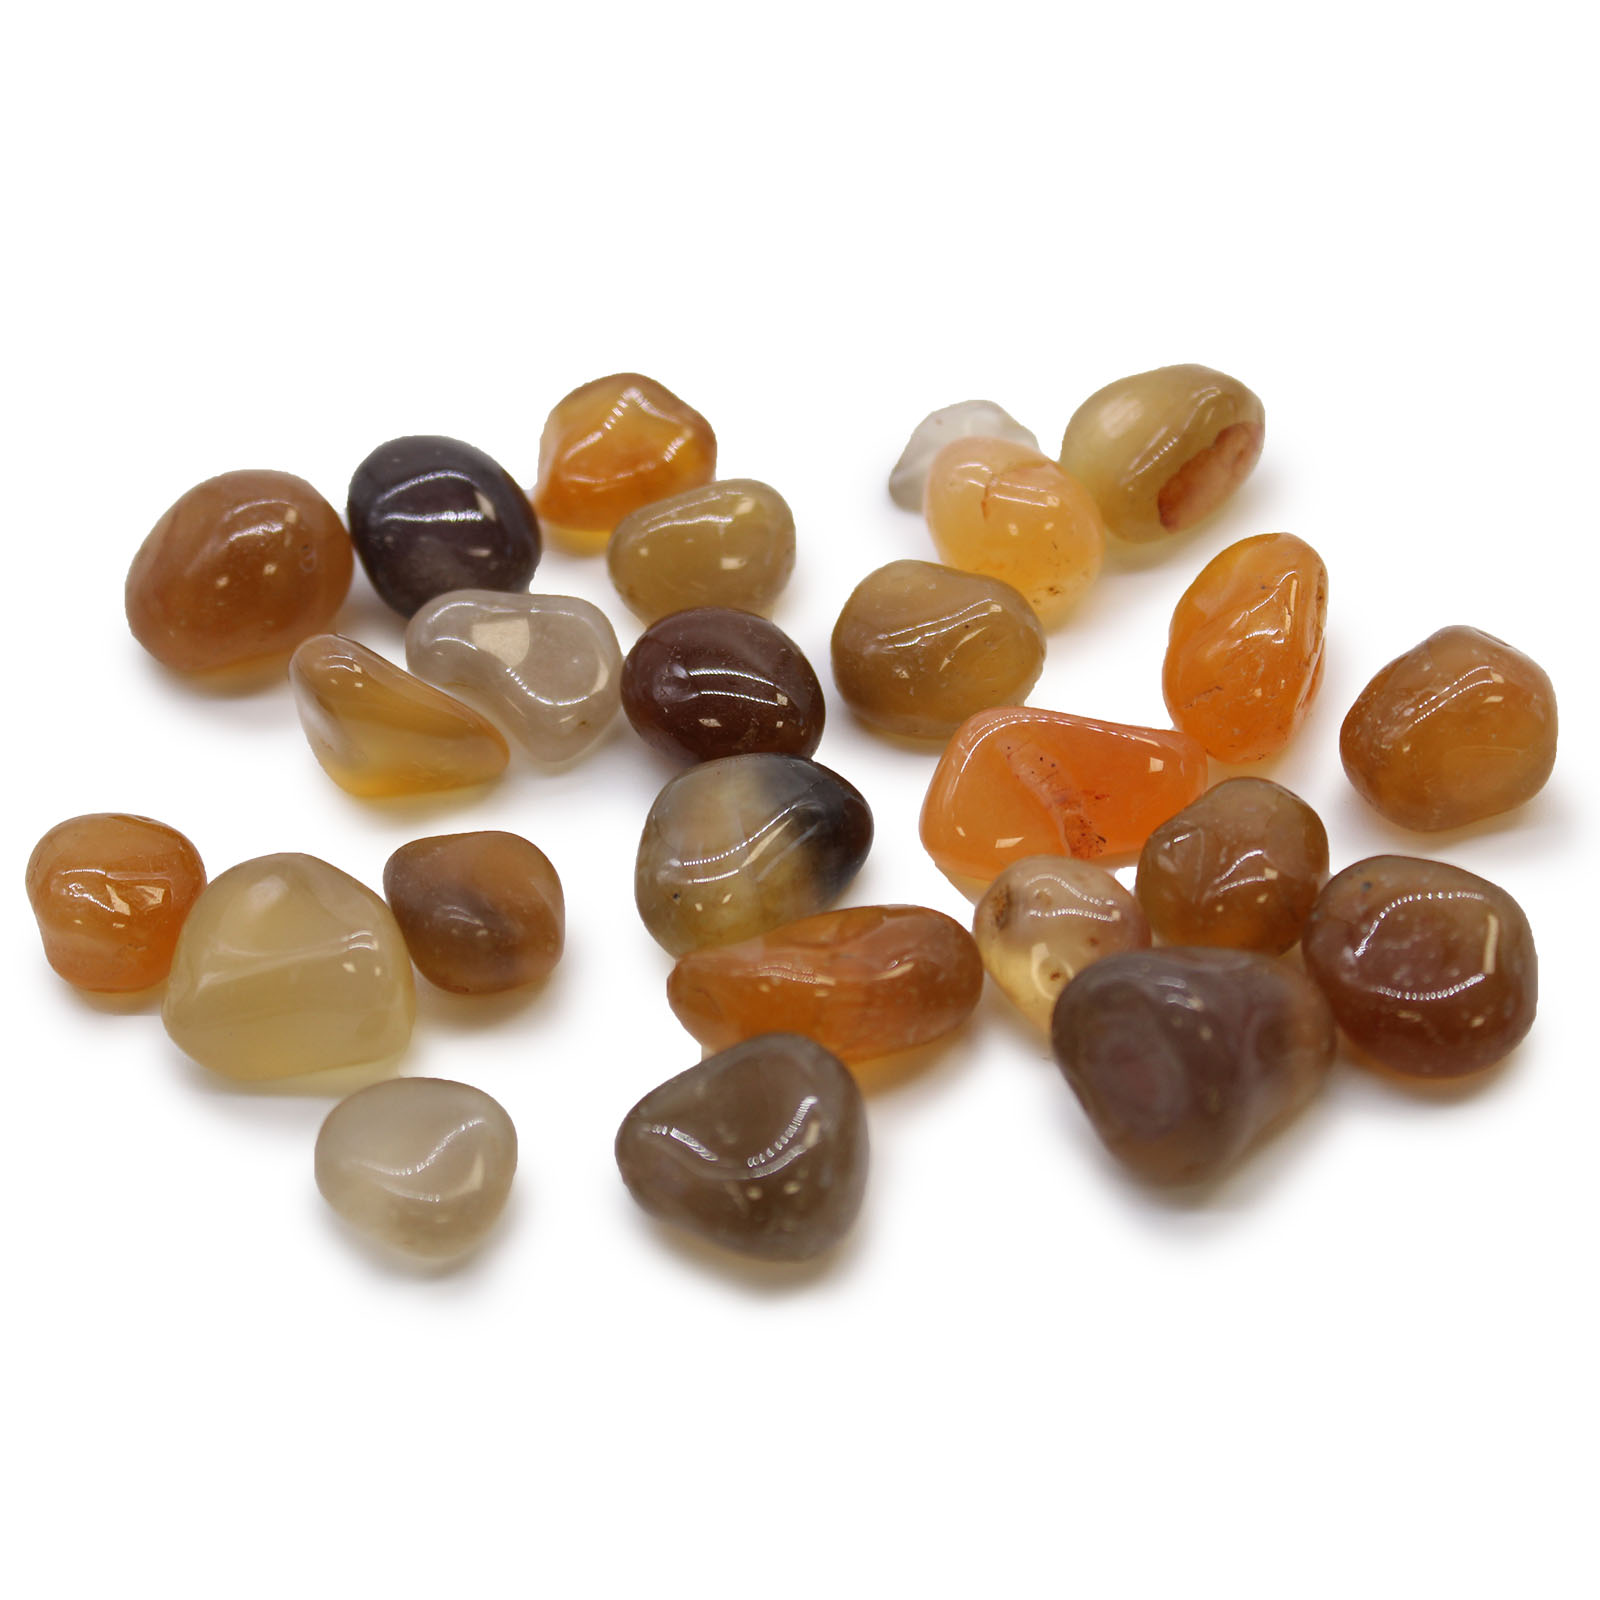 Small African Tumble Stones - Carnelian Agate - Mozambique